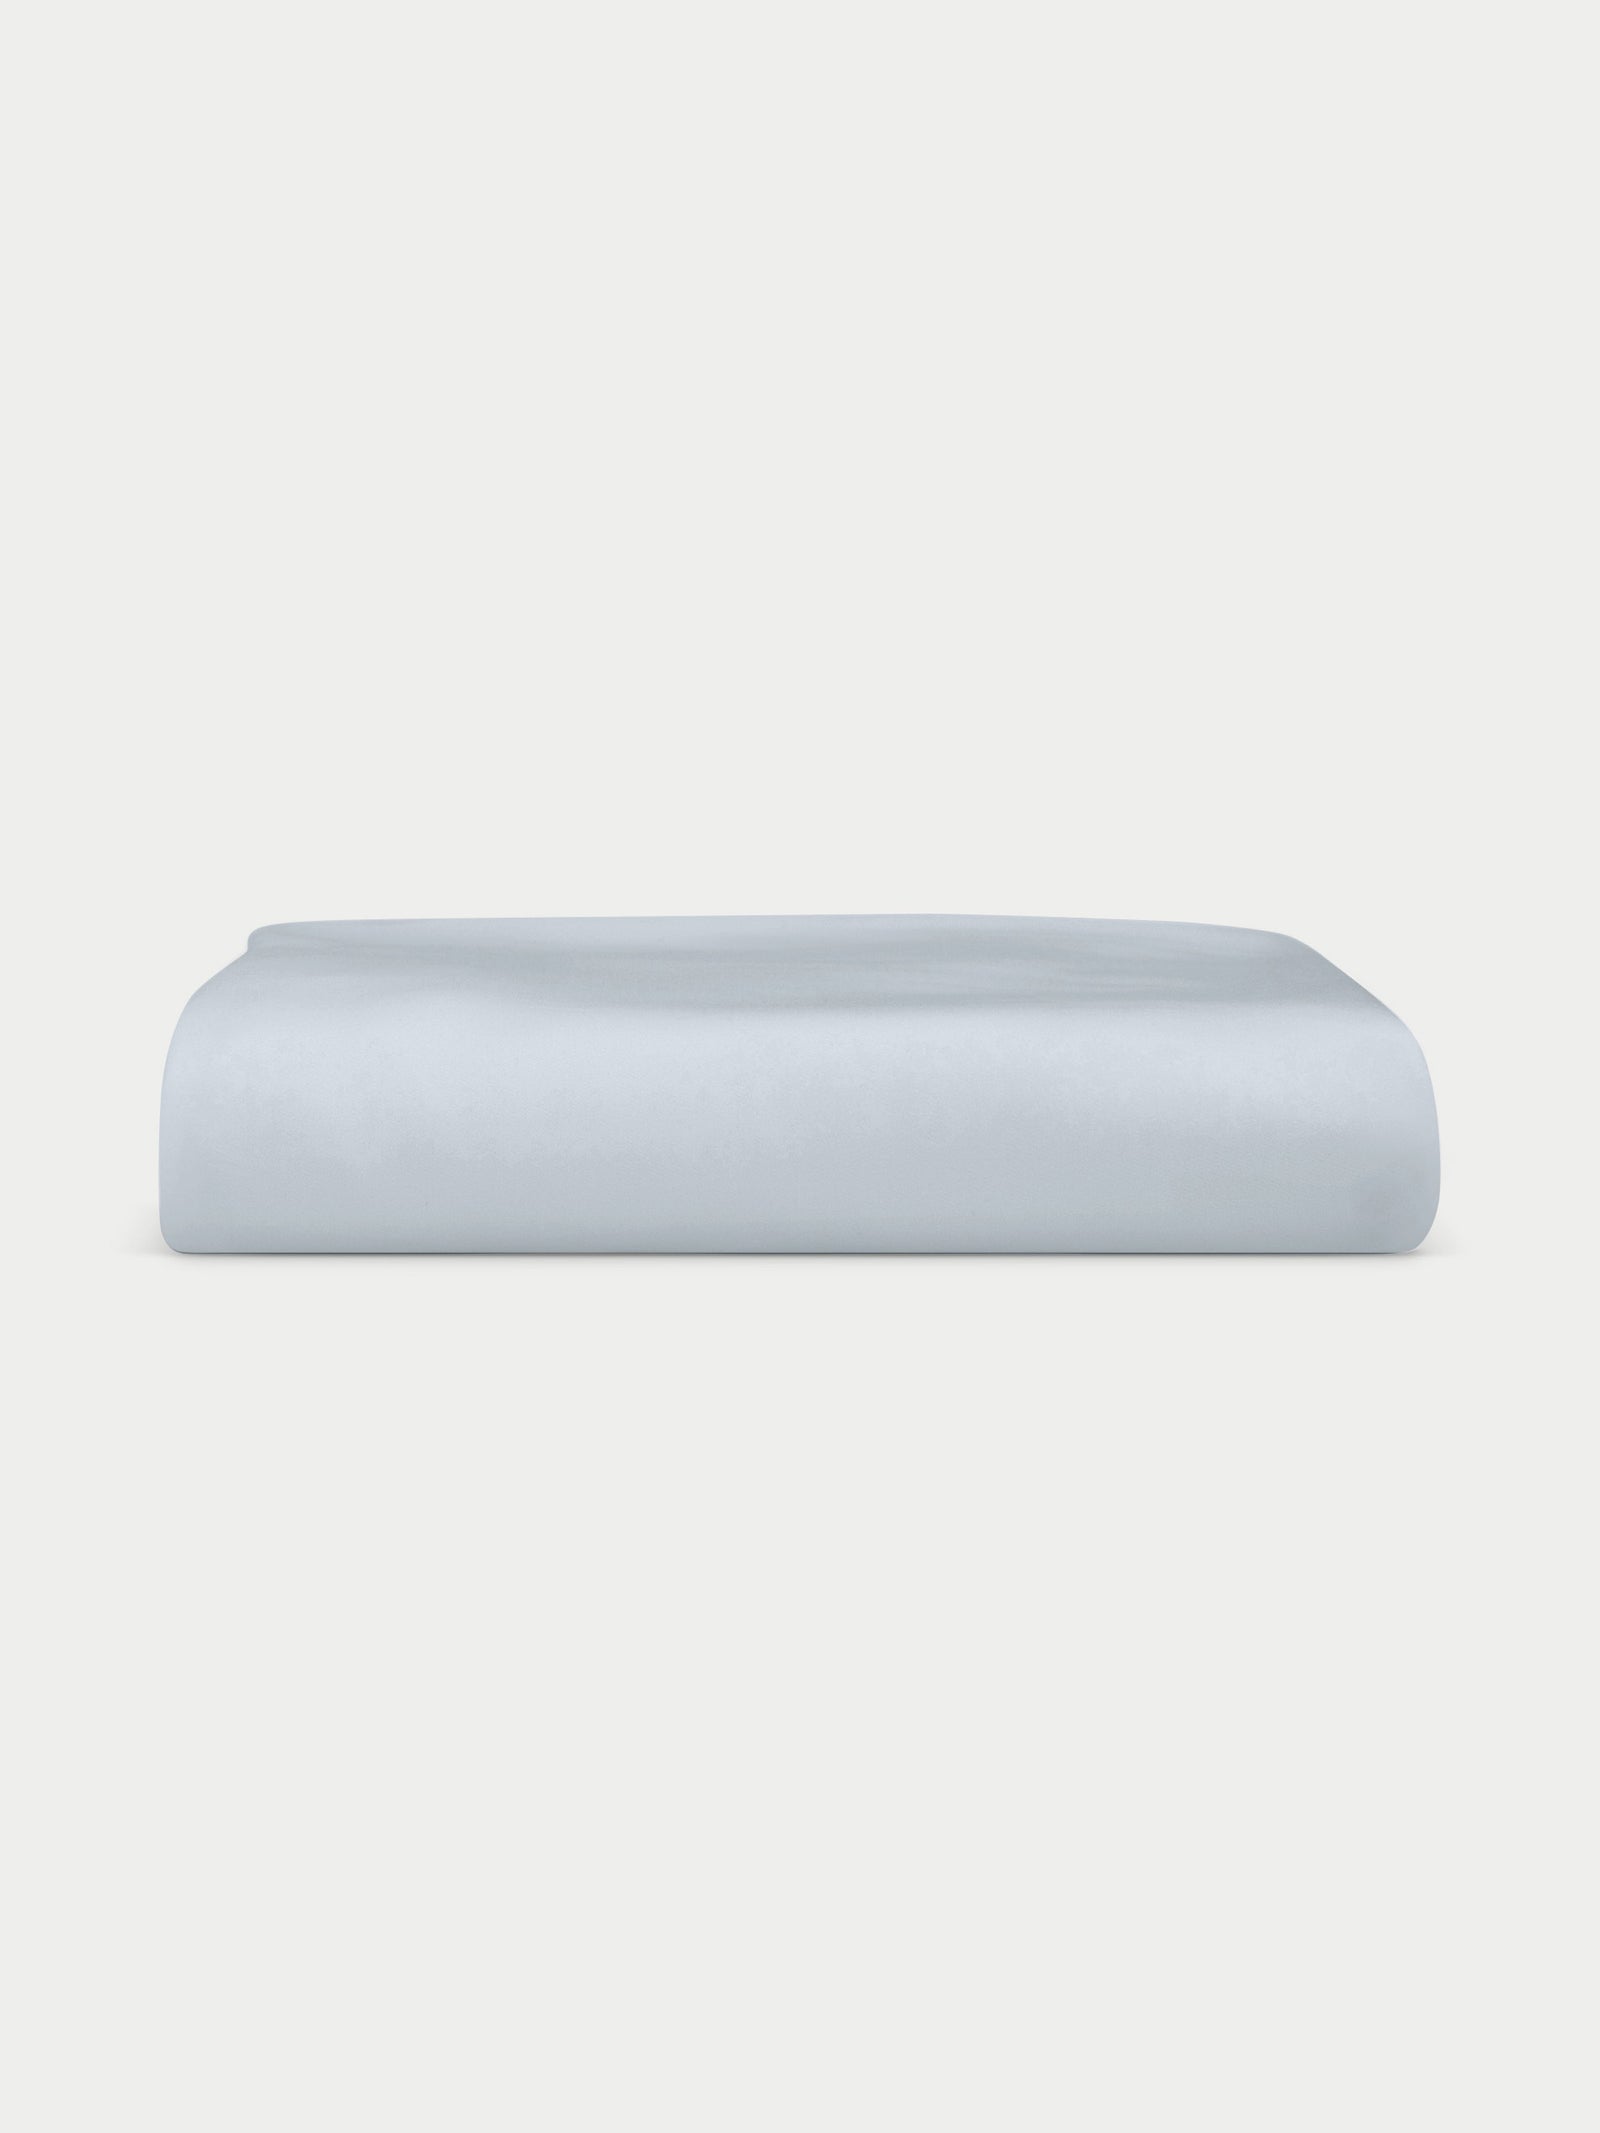 Shore fitted sheet folded with white background 